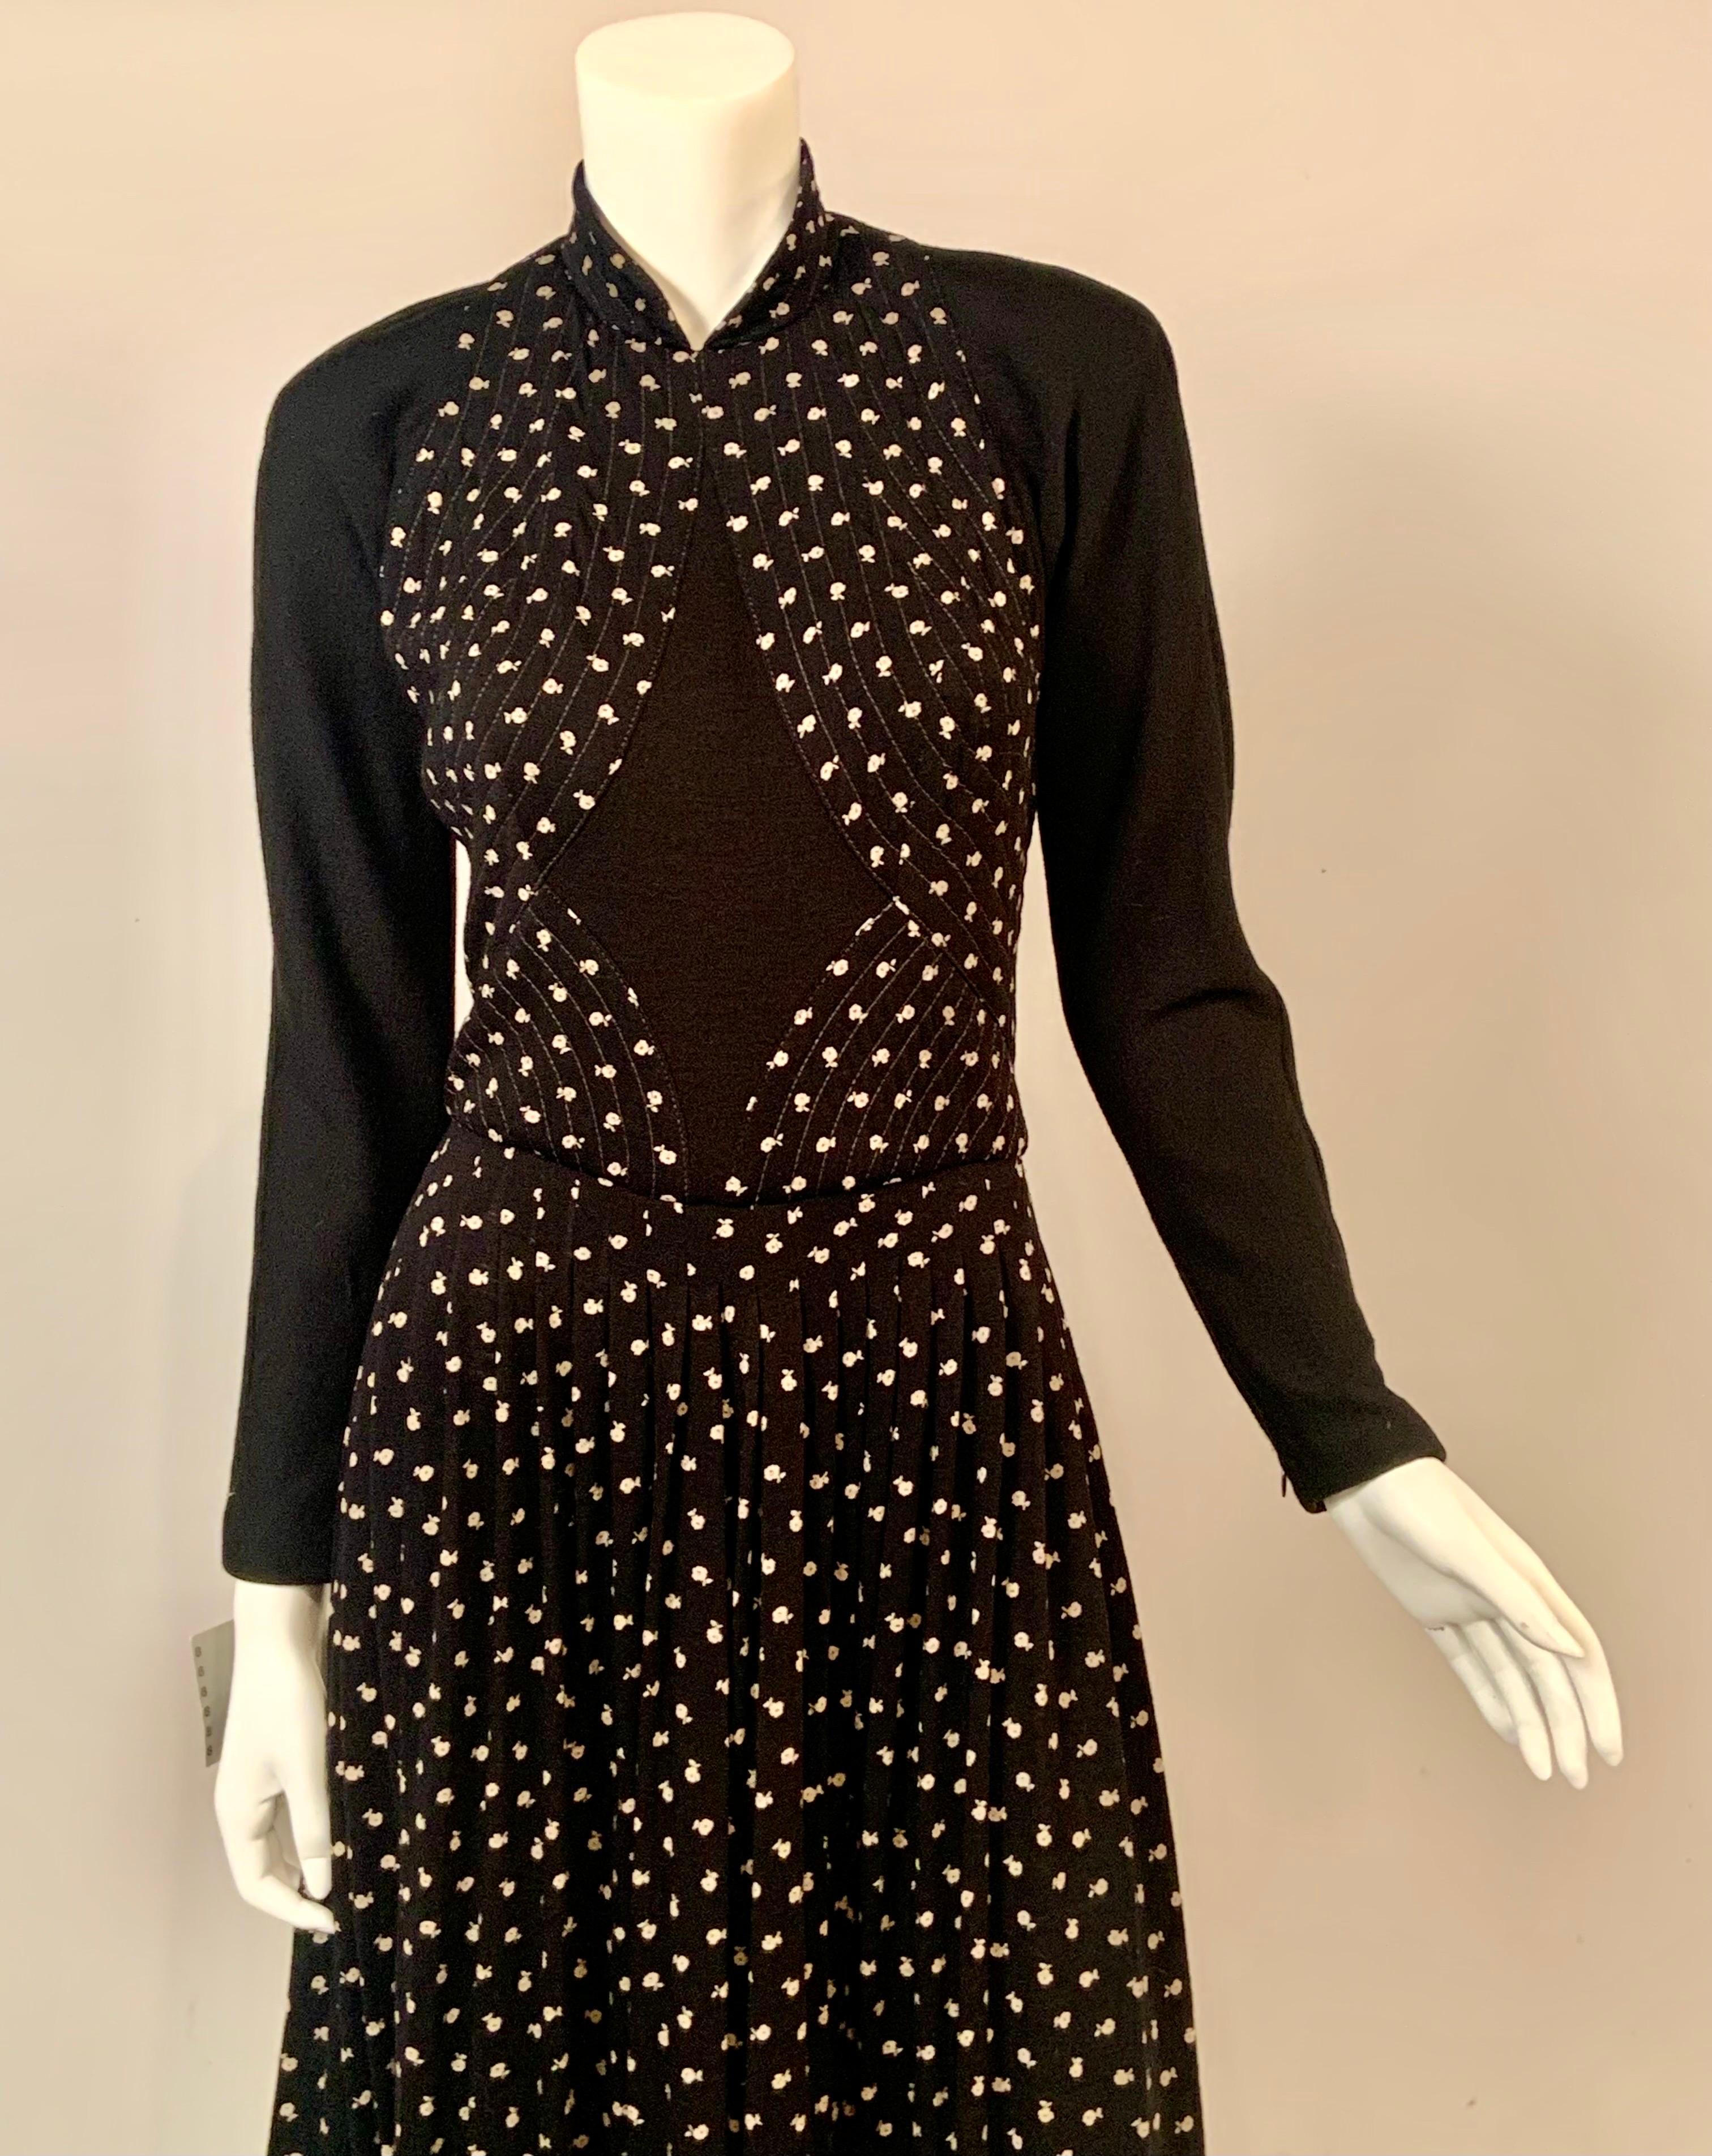 This fabulous Geoffrey Beene evening gown is made from a black and white wool floral print with quilted sections, and black wool jersey at the center of the bodice, the back and the long sleeves.  The skirt is gently pleated below the wide quilted